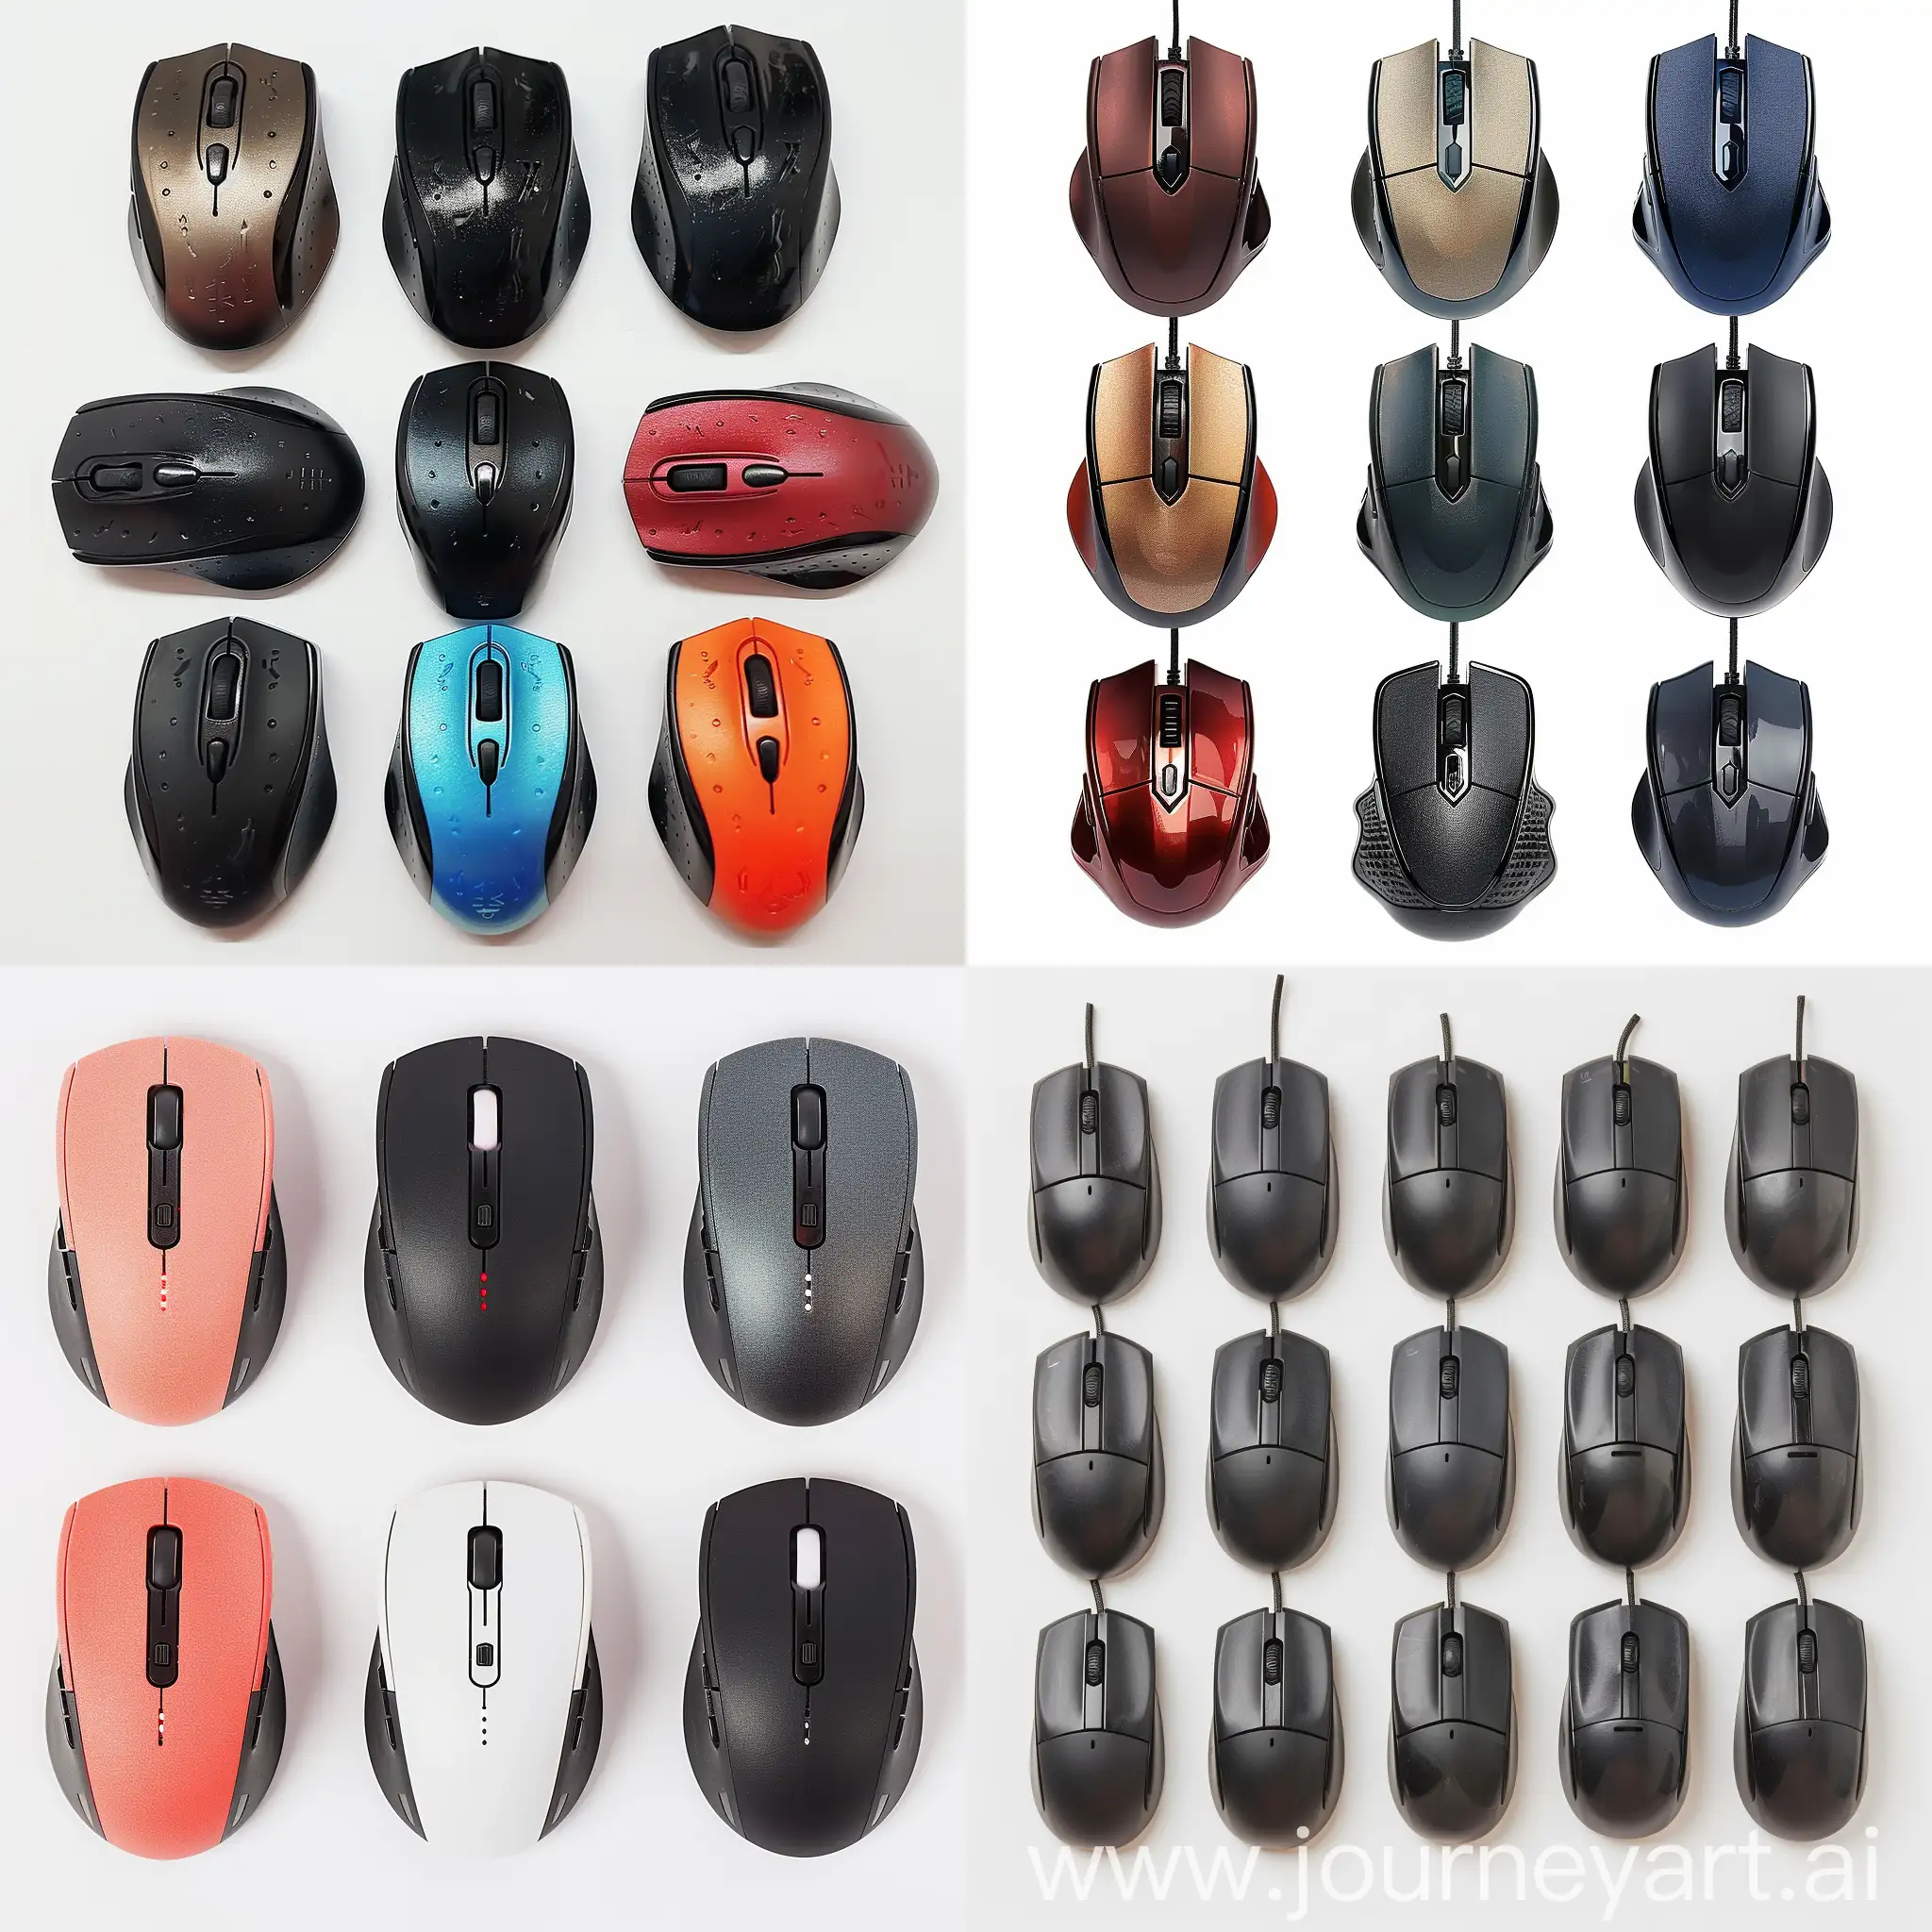 Top-View-of-Ten-Computer-Mice-Arranged-in-a-Grid